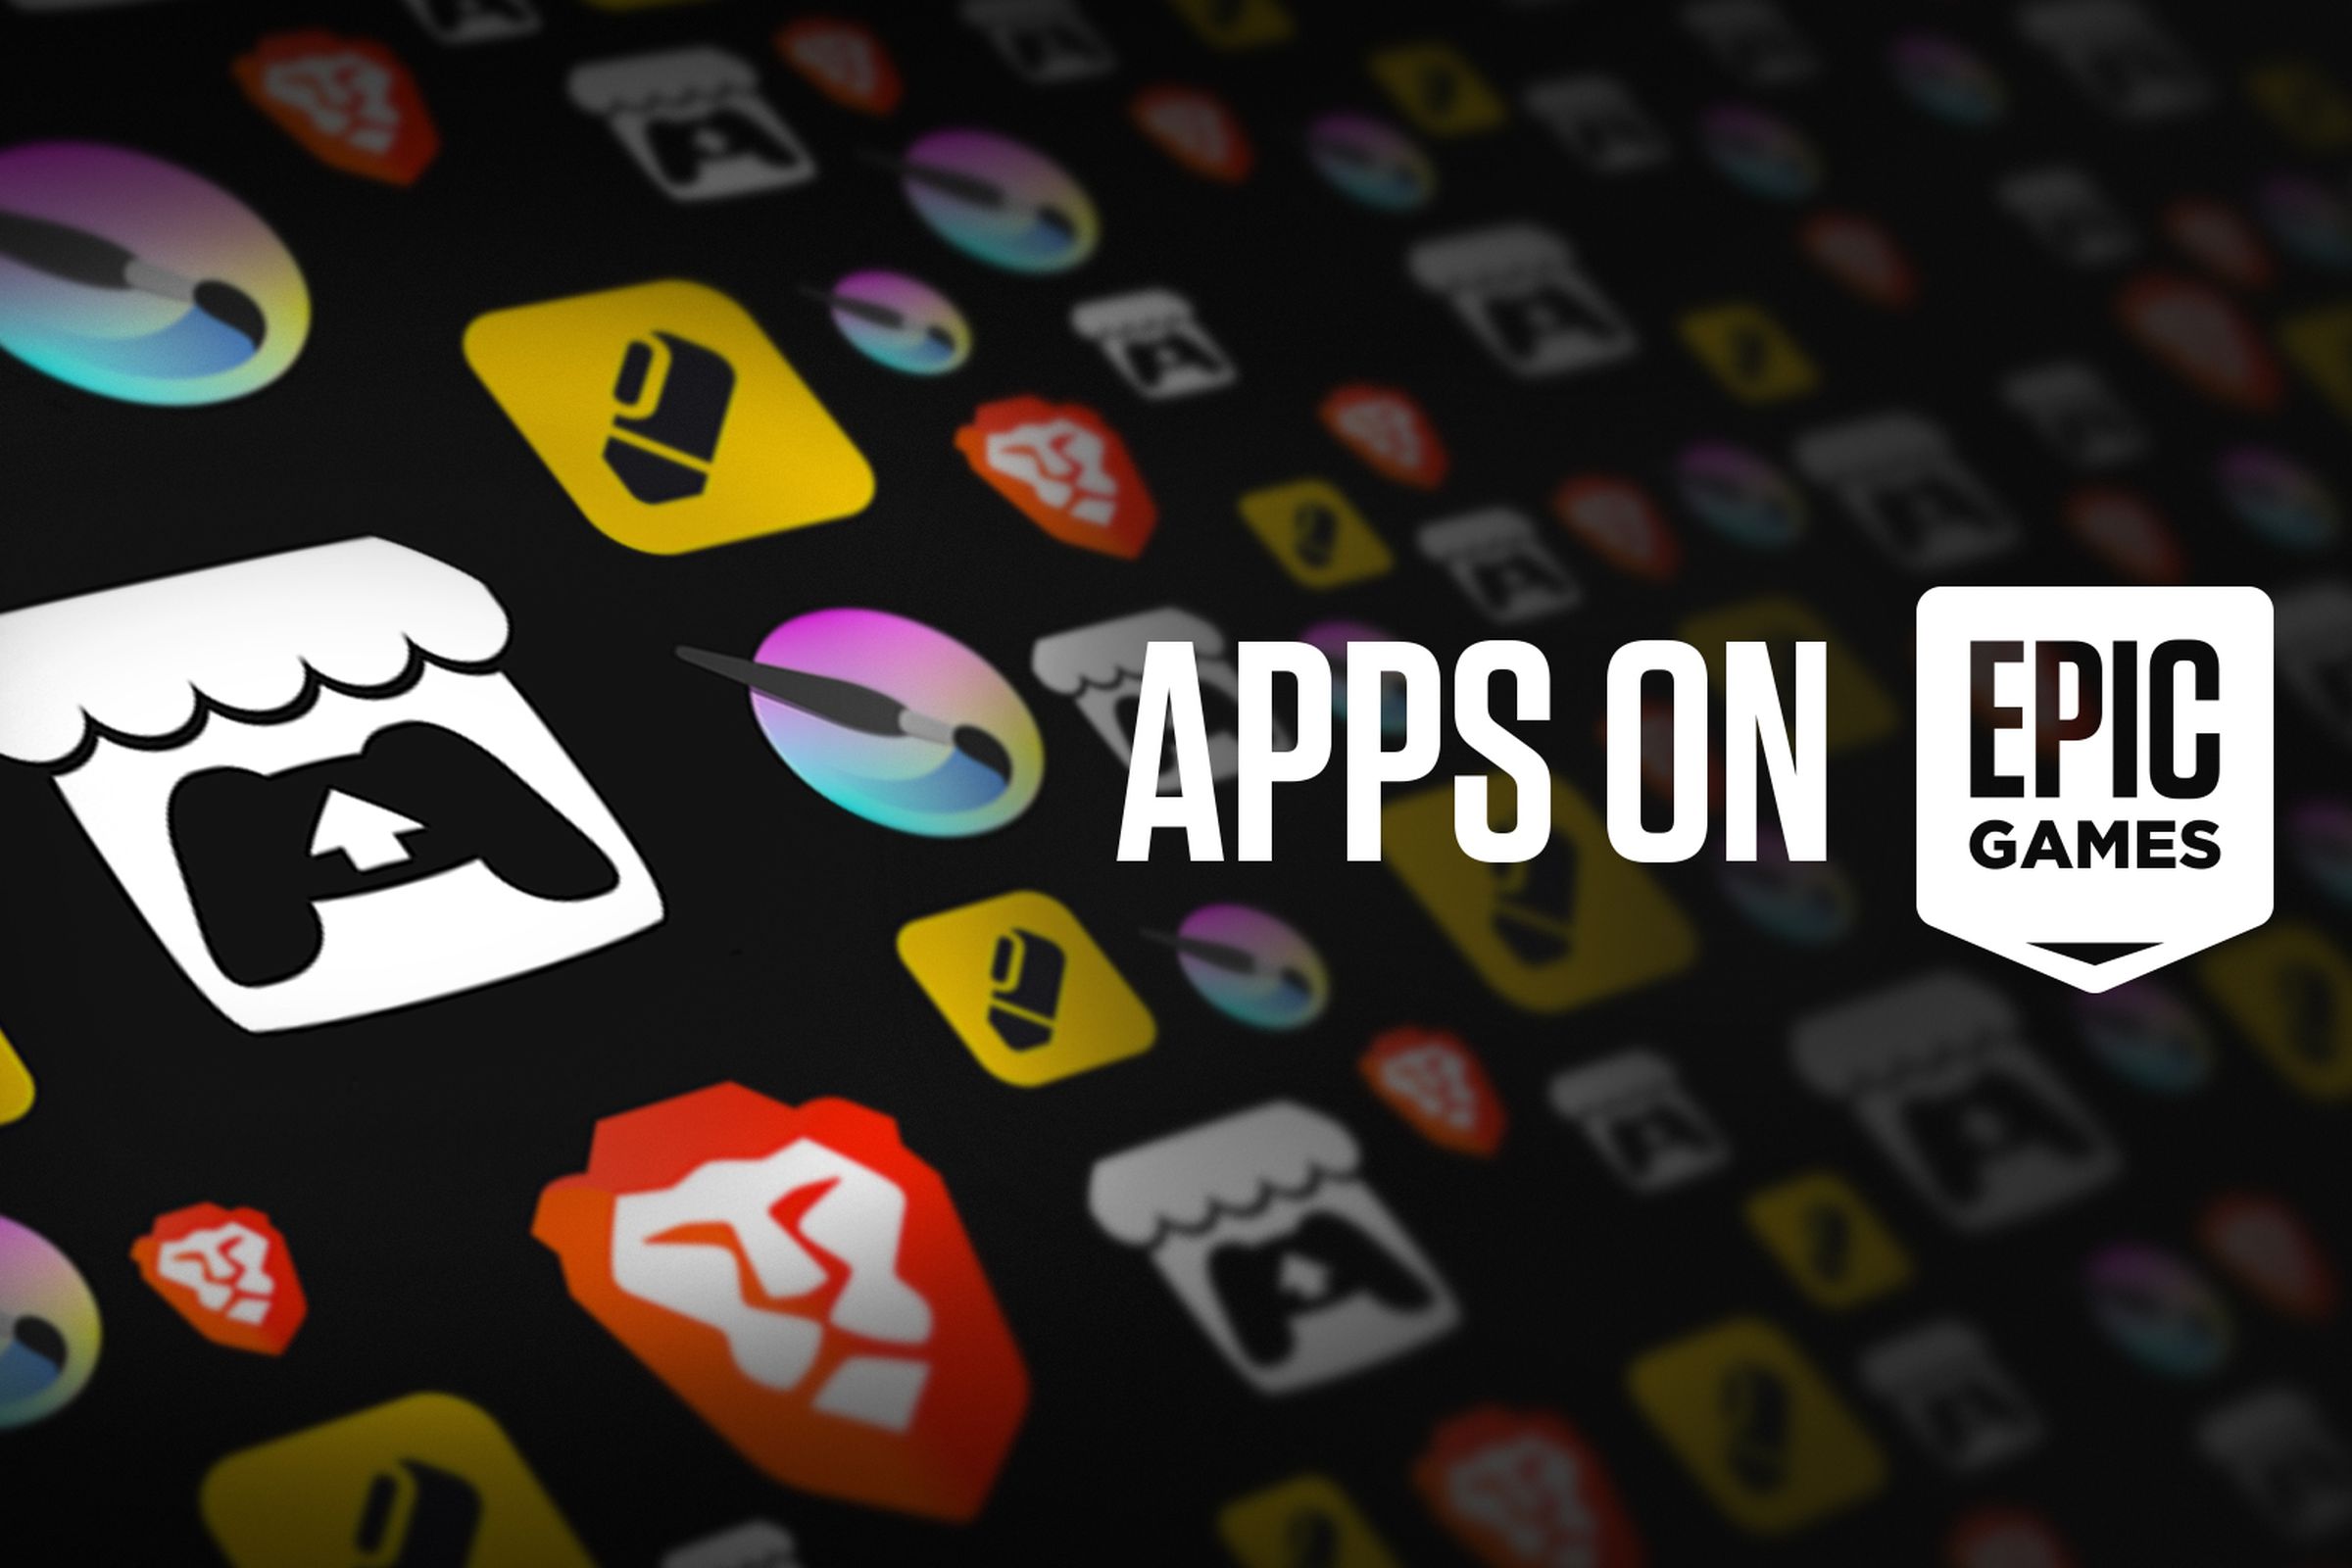 New apps coming to the Epic Games Store.